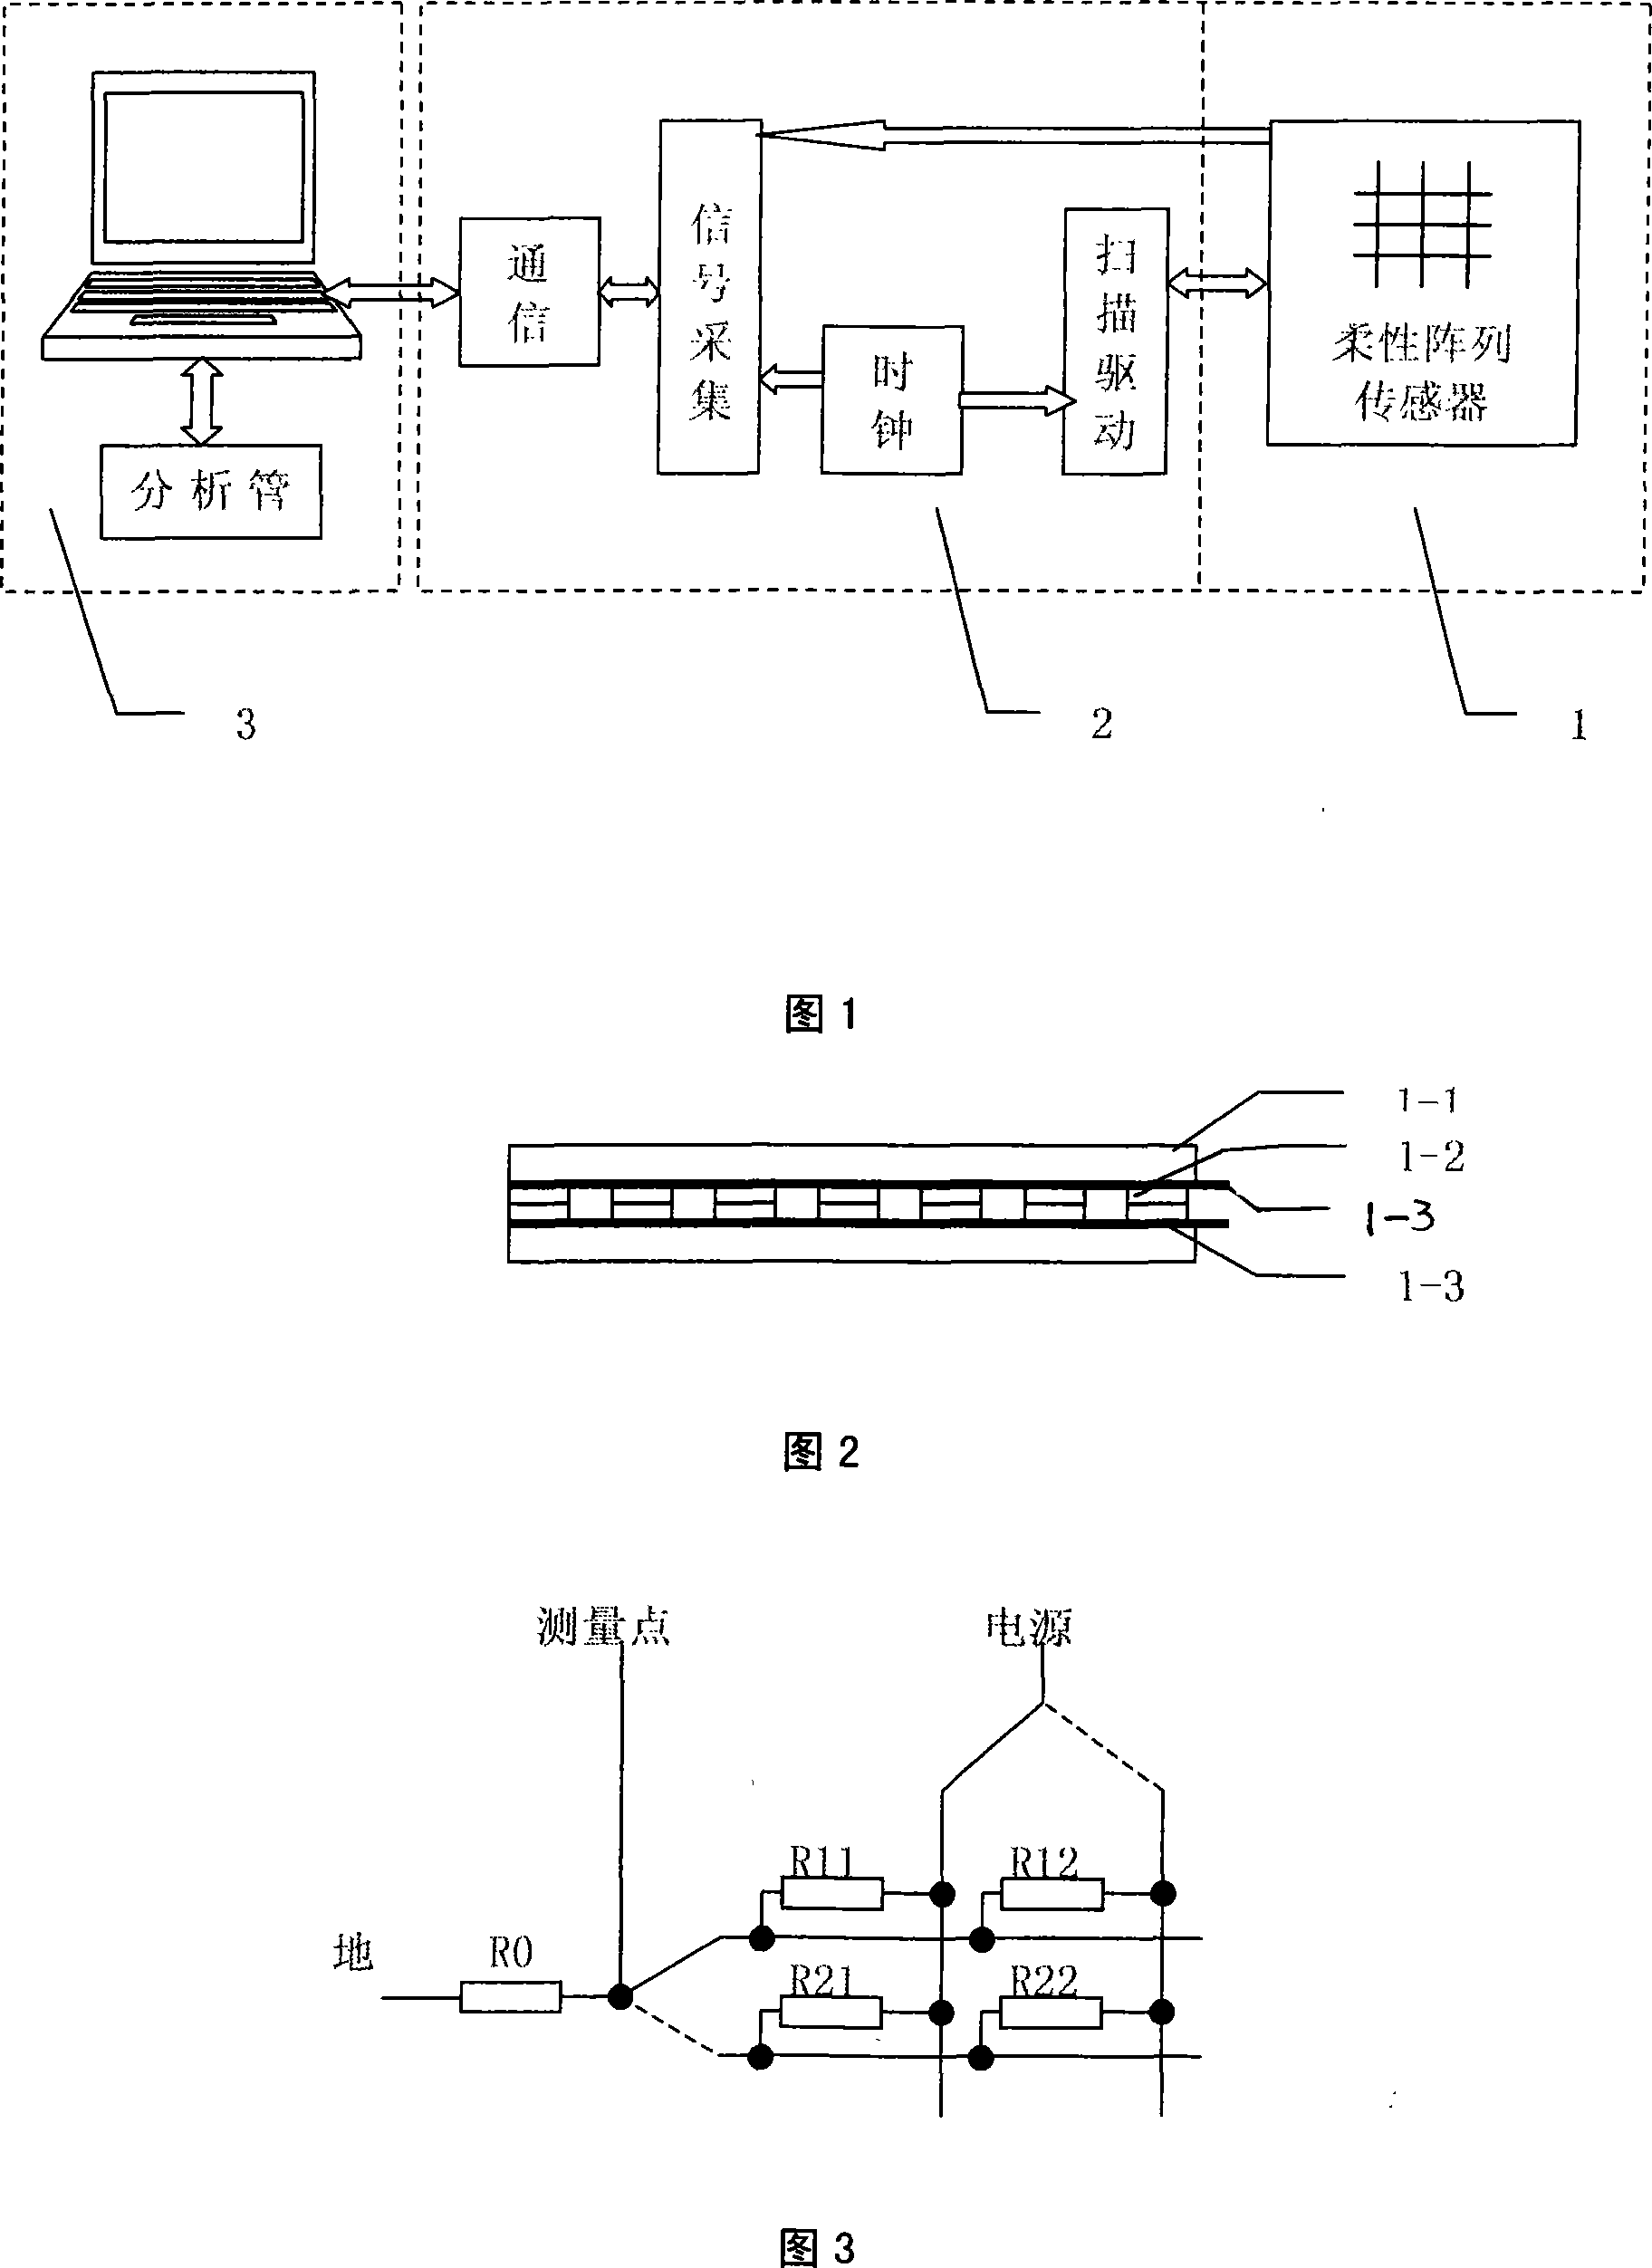 Apparatus for measuring pressure distribution and method for measuring thereof